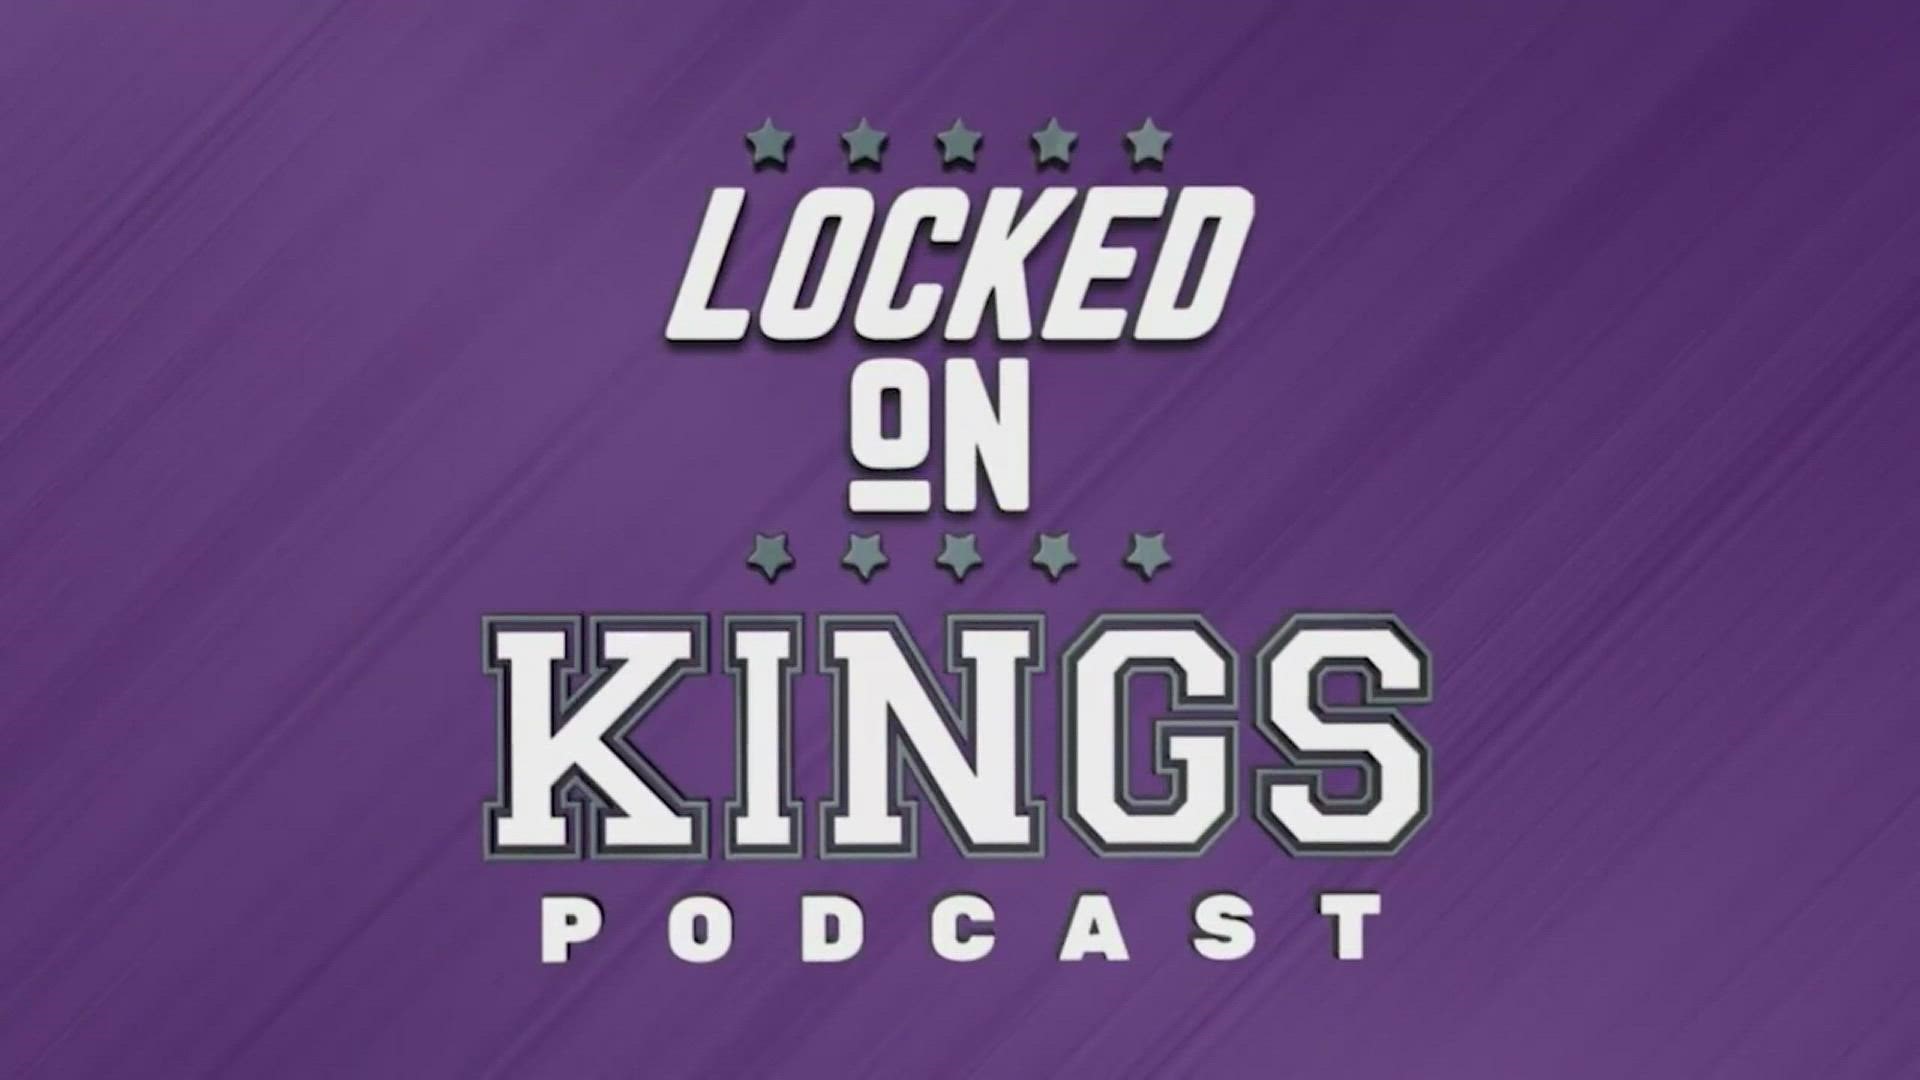 Matt George recaps the Sacramento Kings loss to the Timberwolves, where for the 2nd straight game the offense really struggled.